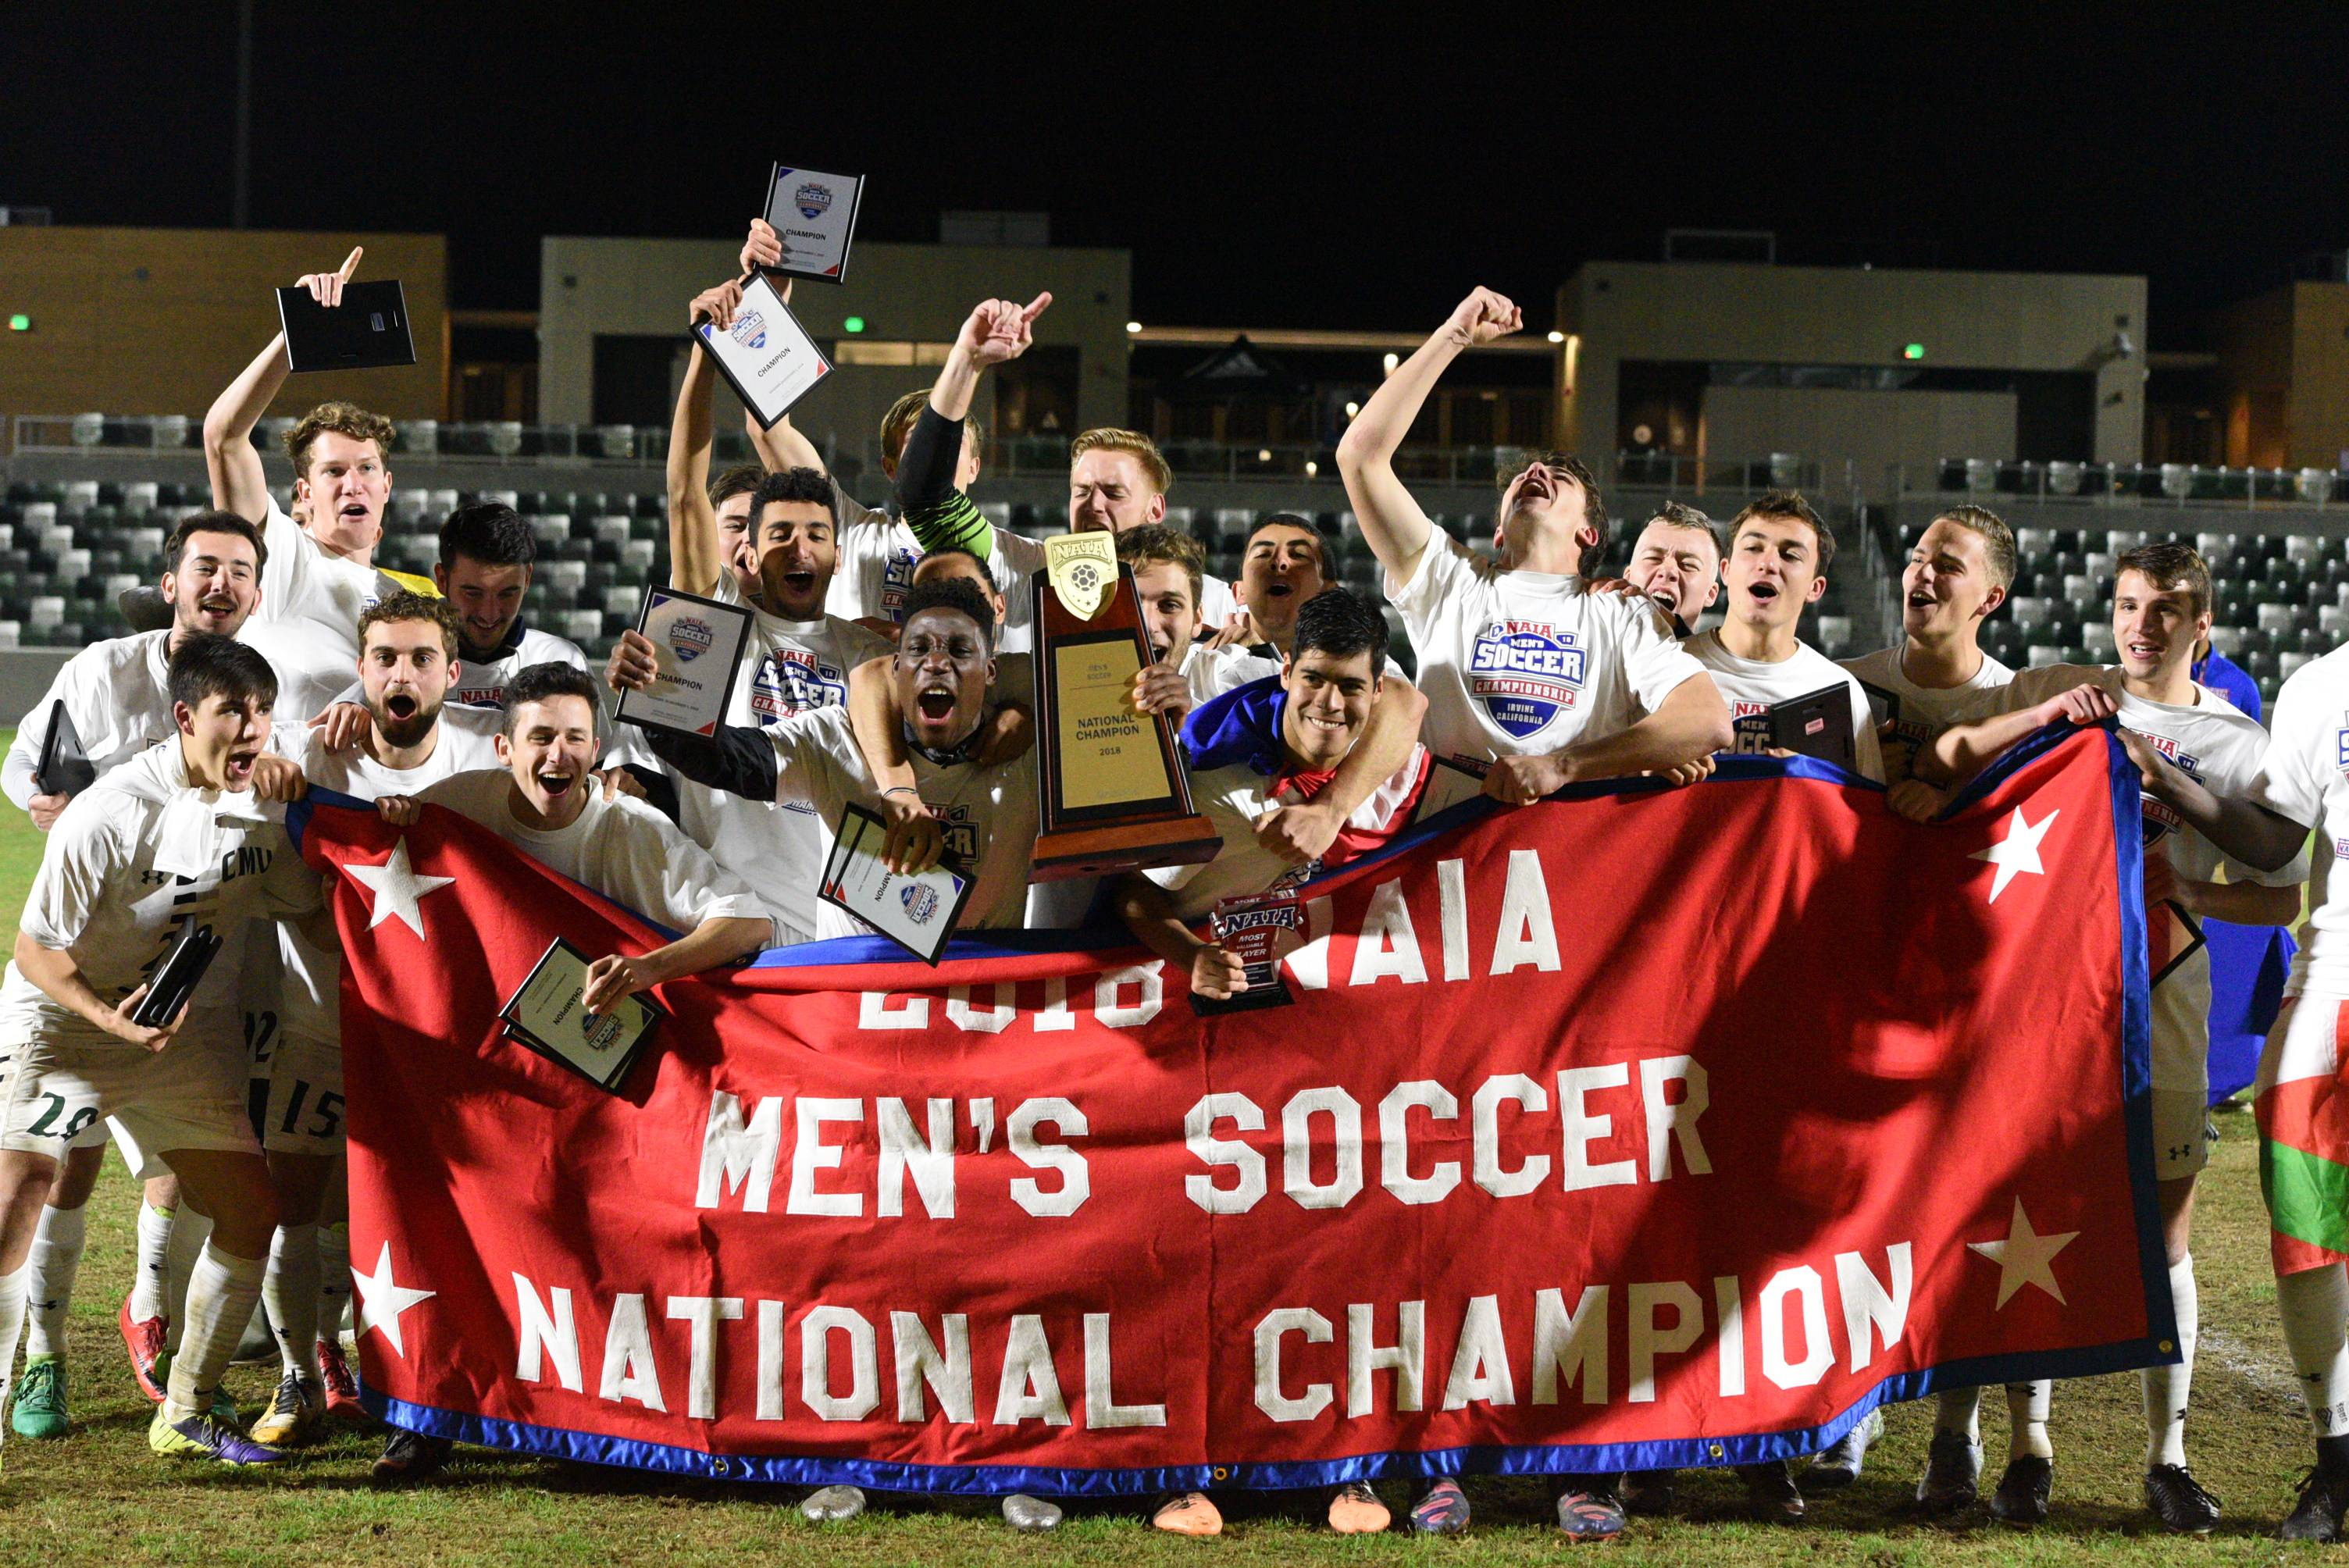 Central Methodist takes home first national championship in school history